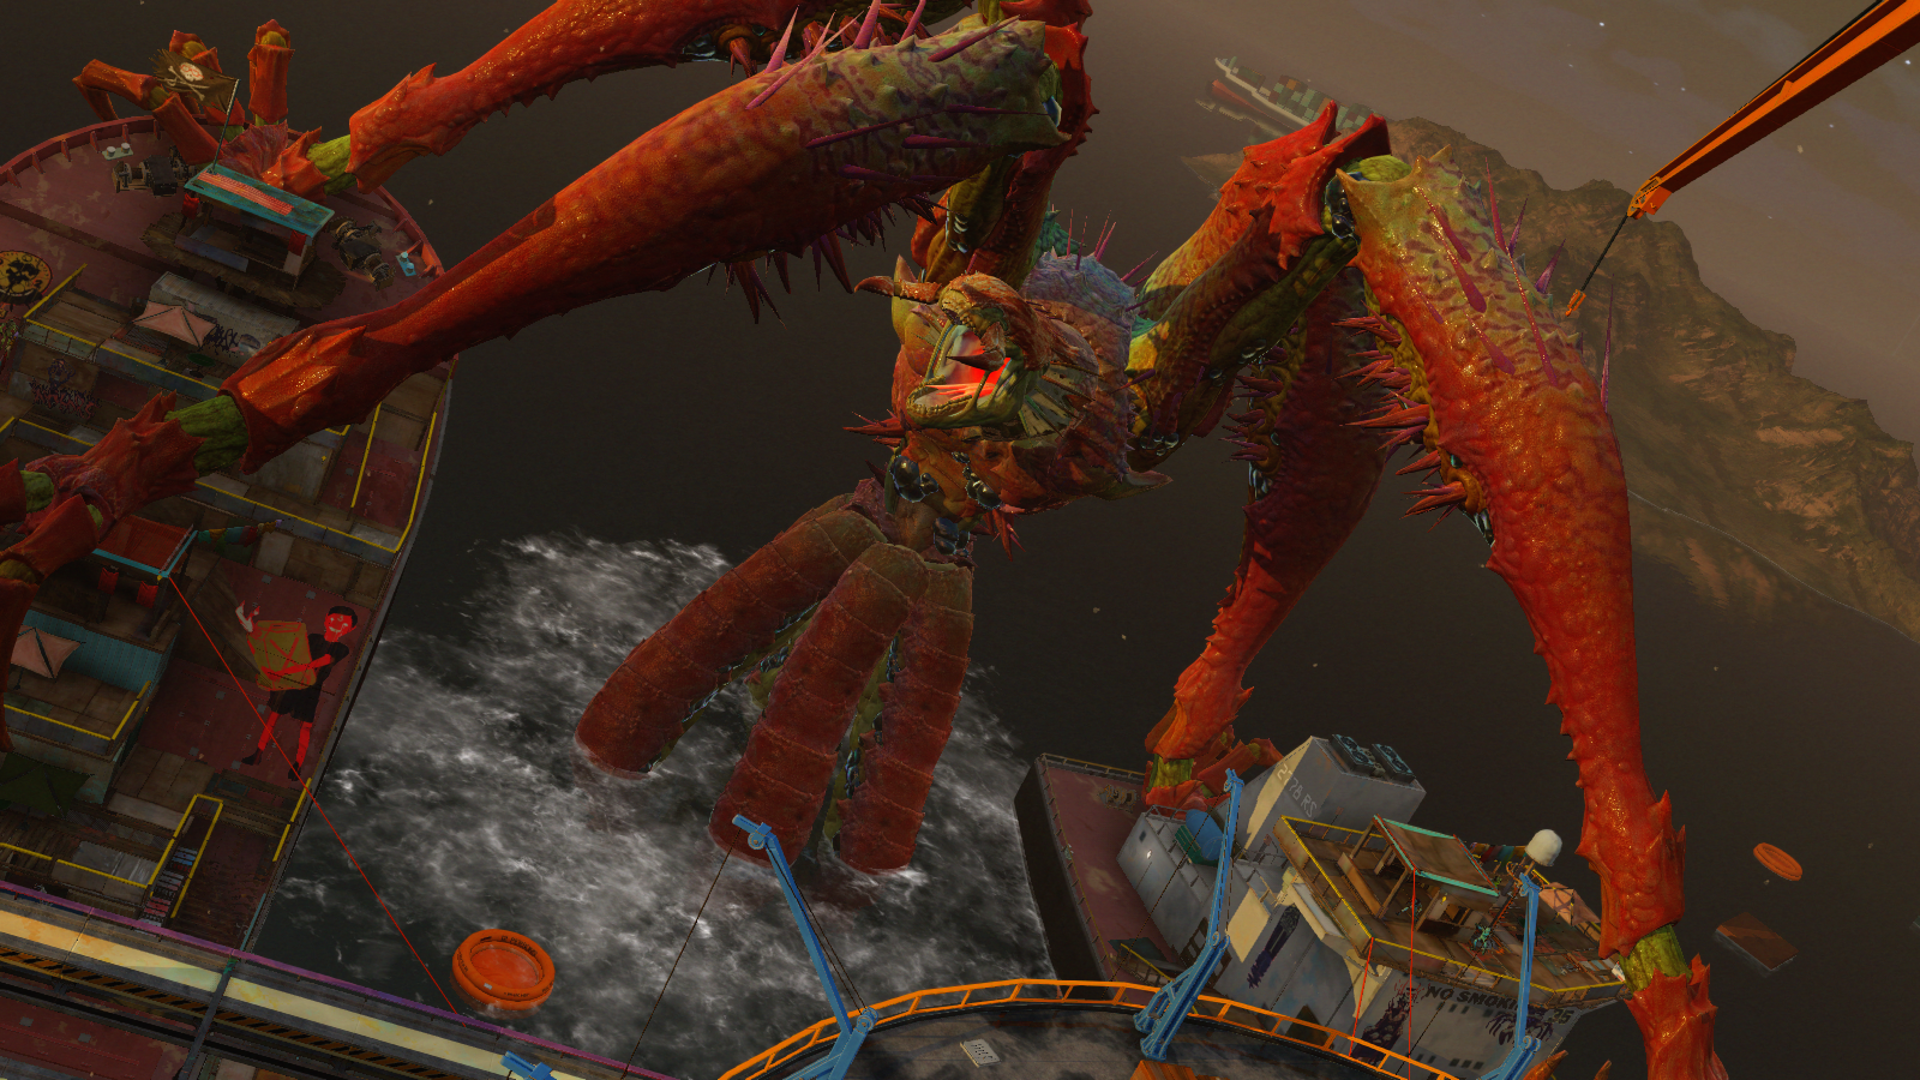 Sunset Overdrive: Mystery of the Mooil Rig! DLC (XONE) — Análise do DLC, by Raphael R.